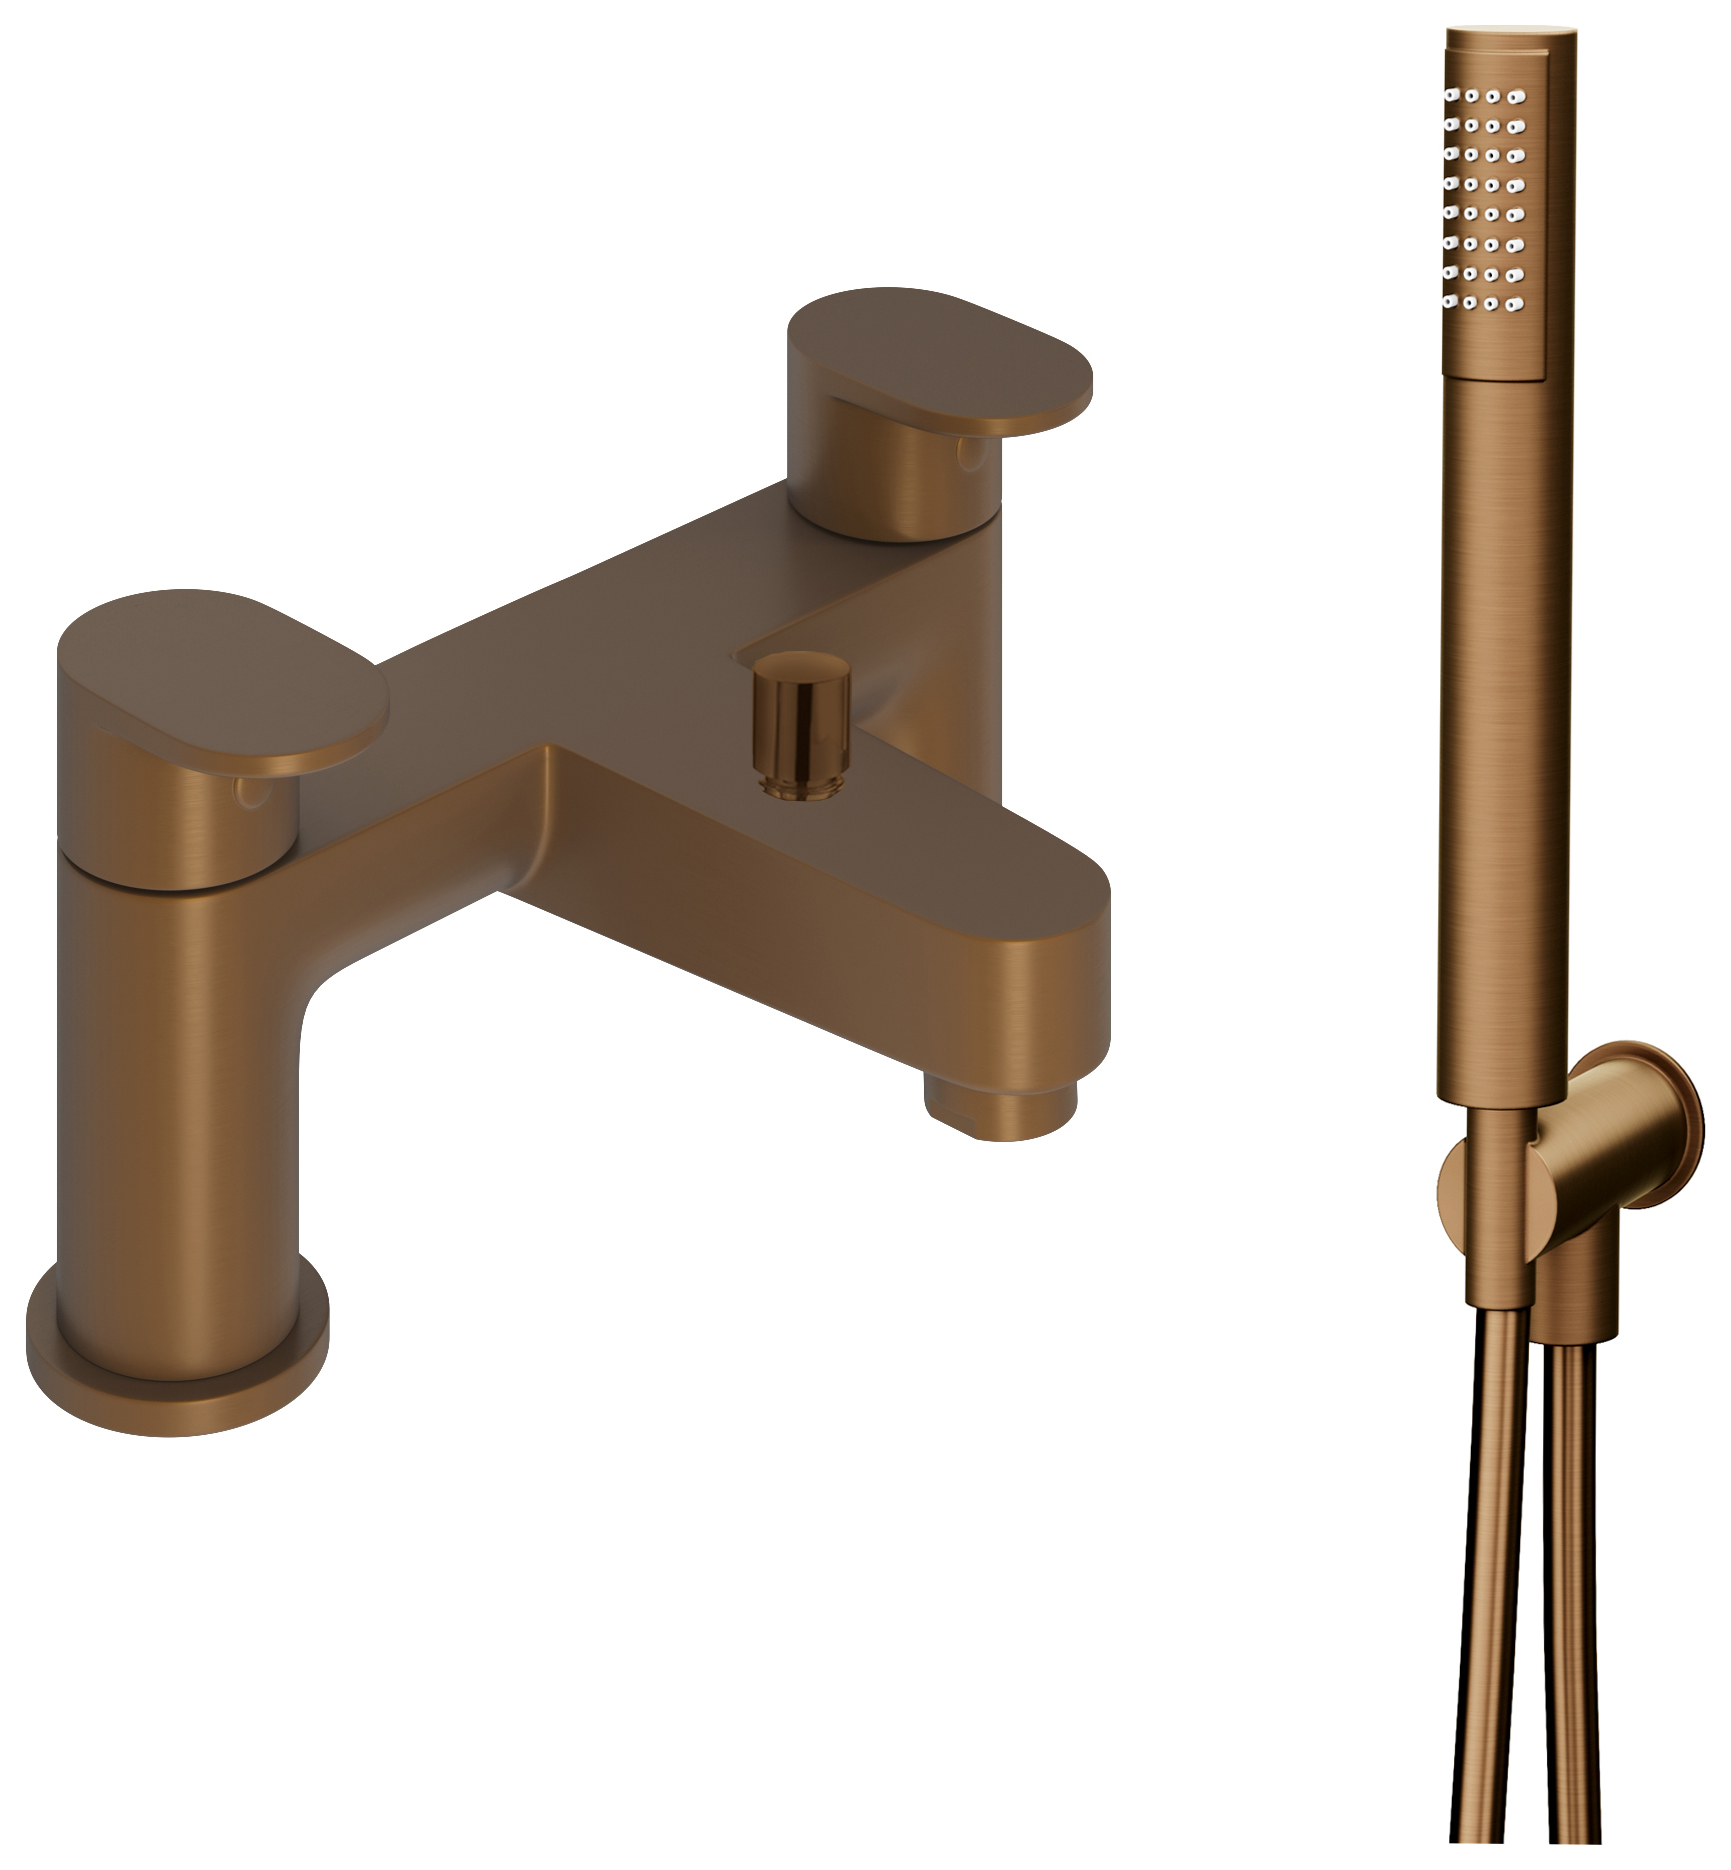 Image of Beckington Double Lever Deck Mounted Bath Shower Mixer Tap - Brushed Bronze